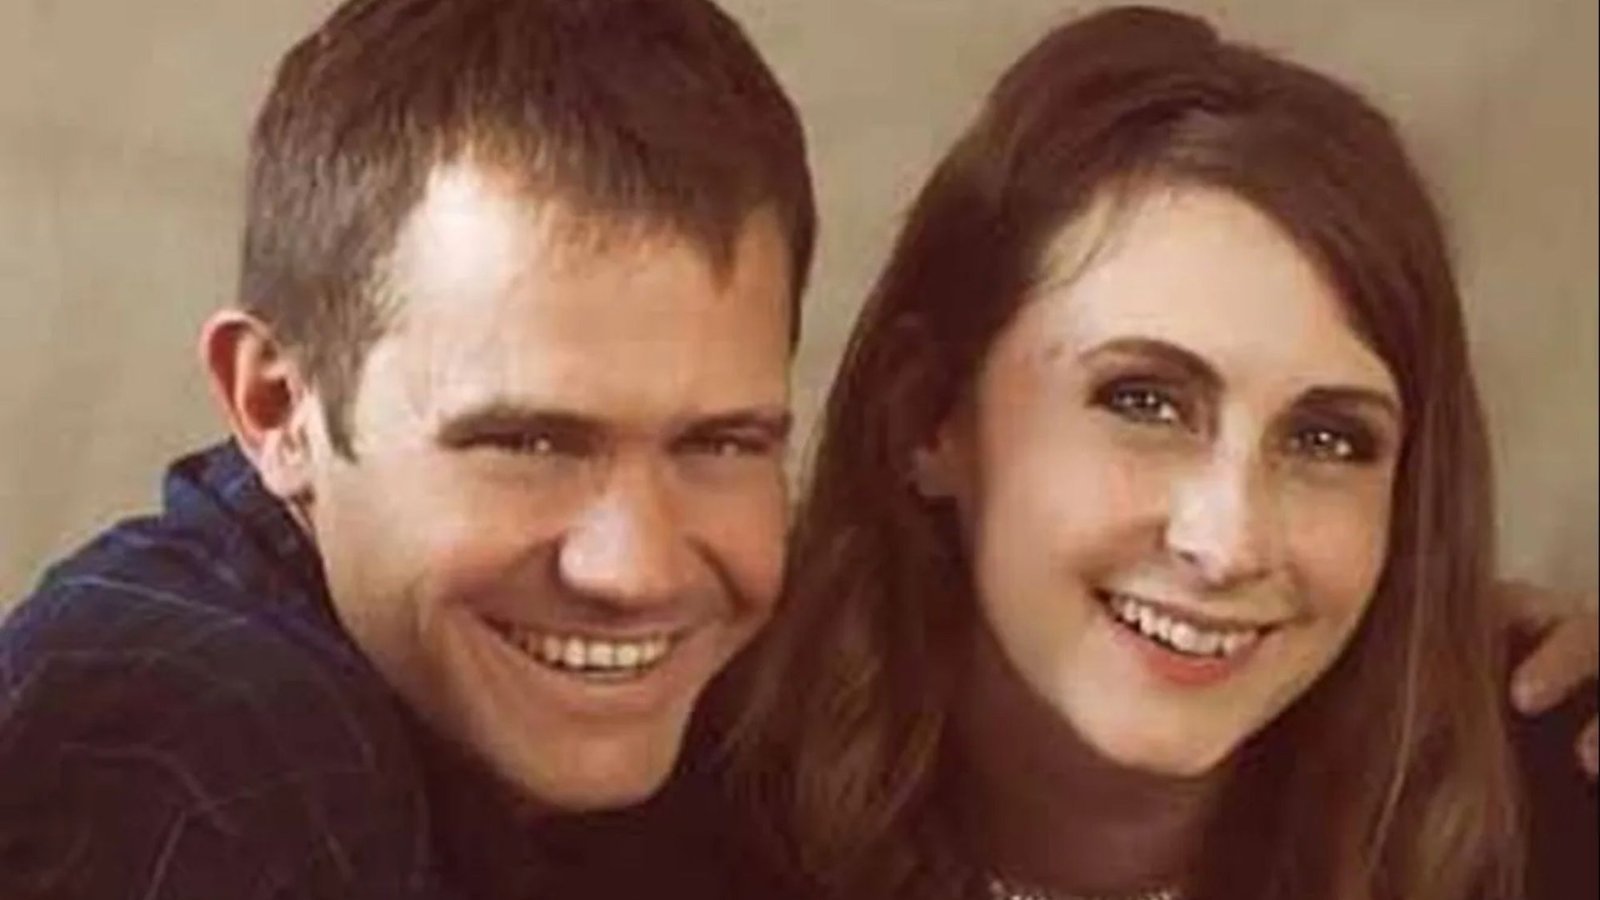 Army officer stabbed repeatedly near barracks pictured with hero wife who saved him after attacker appears in court